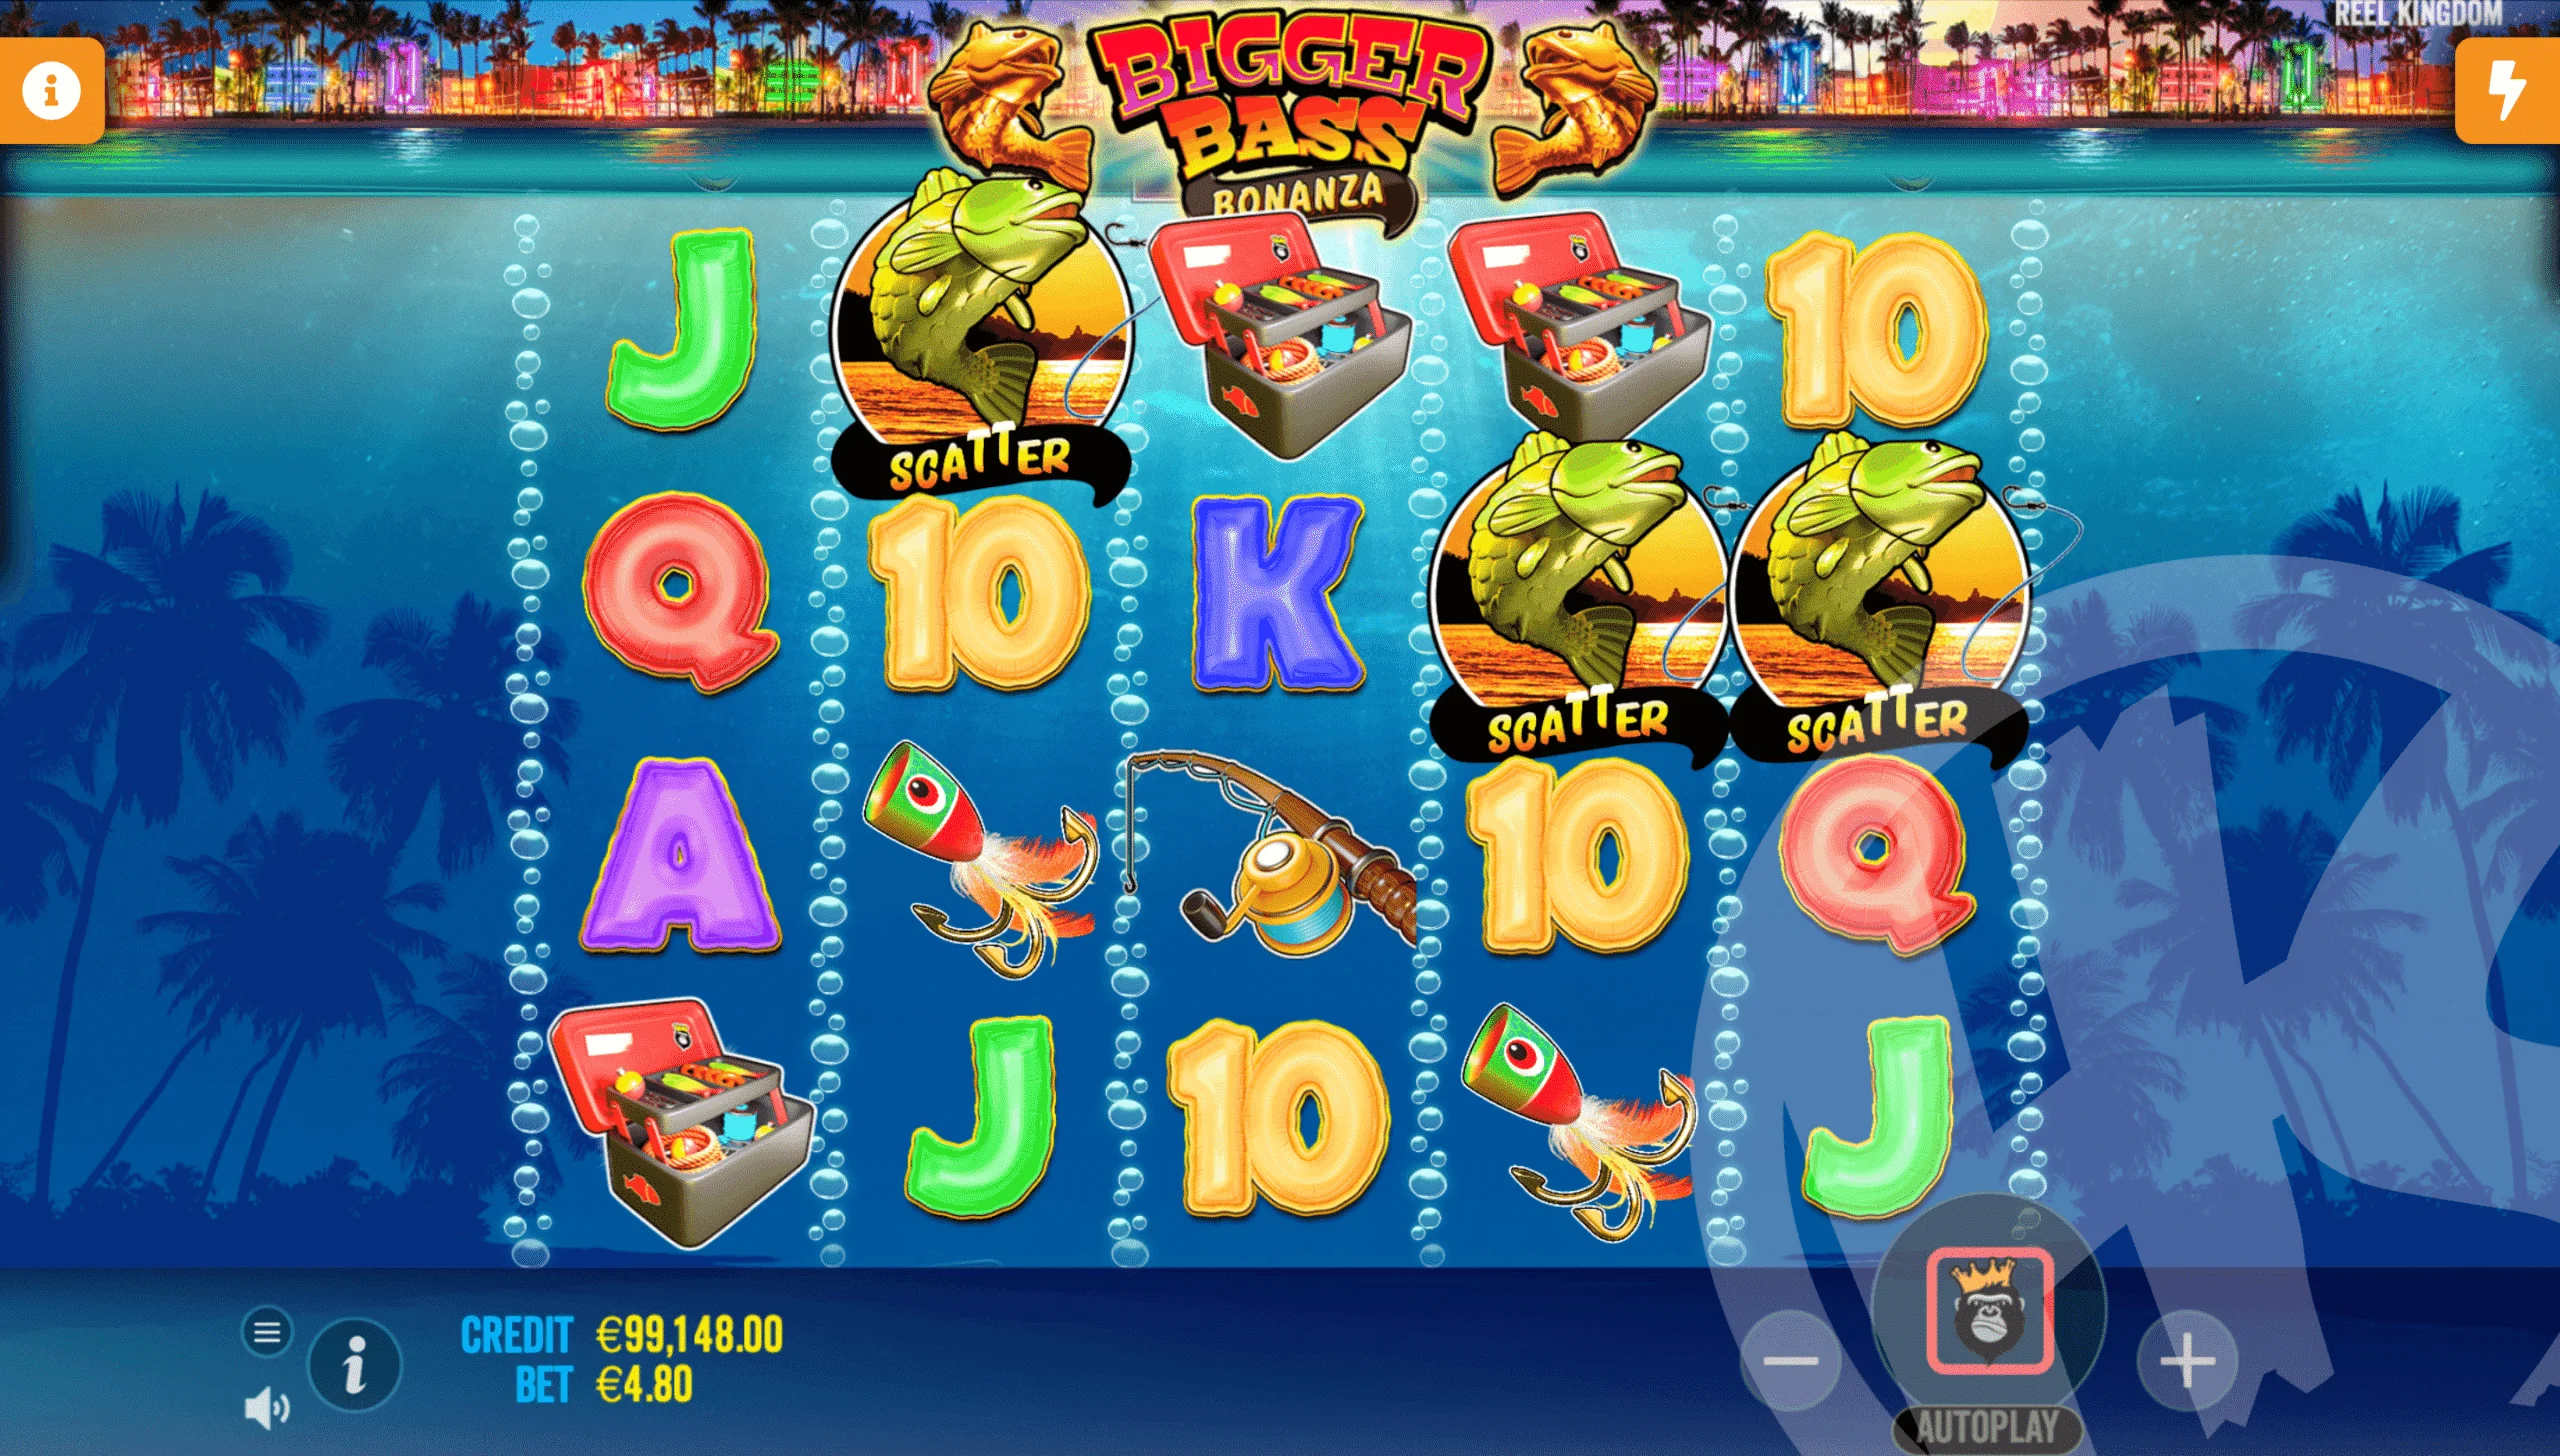 3 Scatters Triggers Free Spins